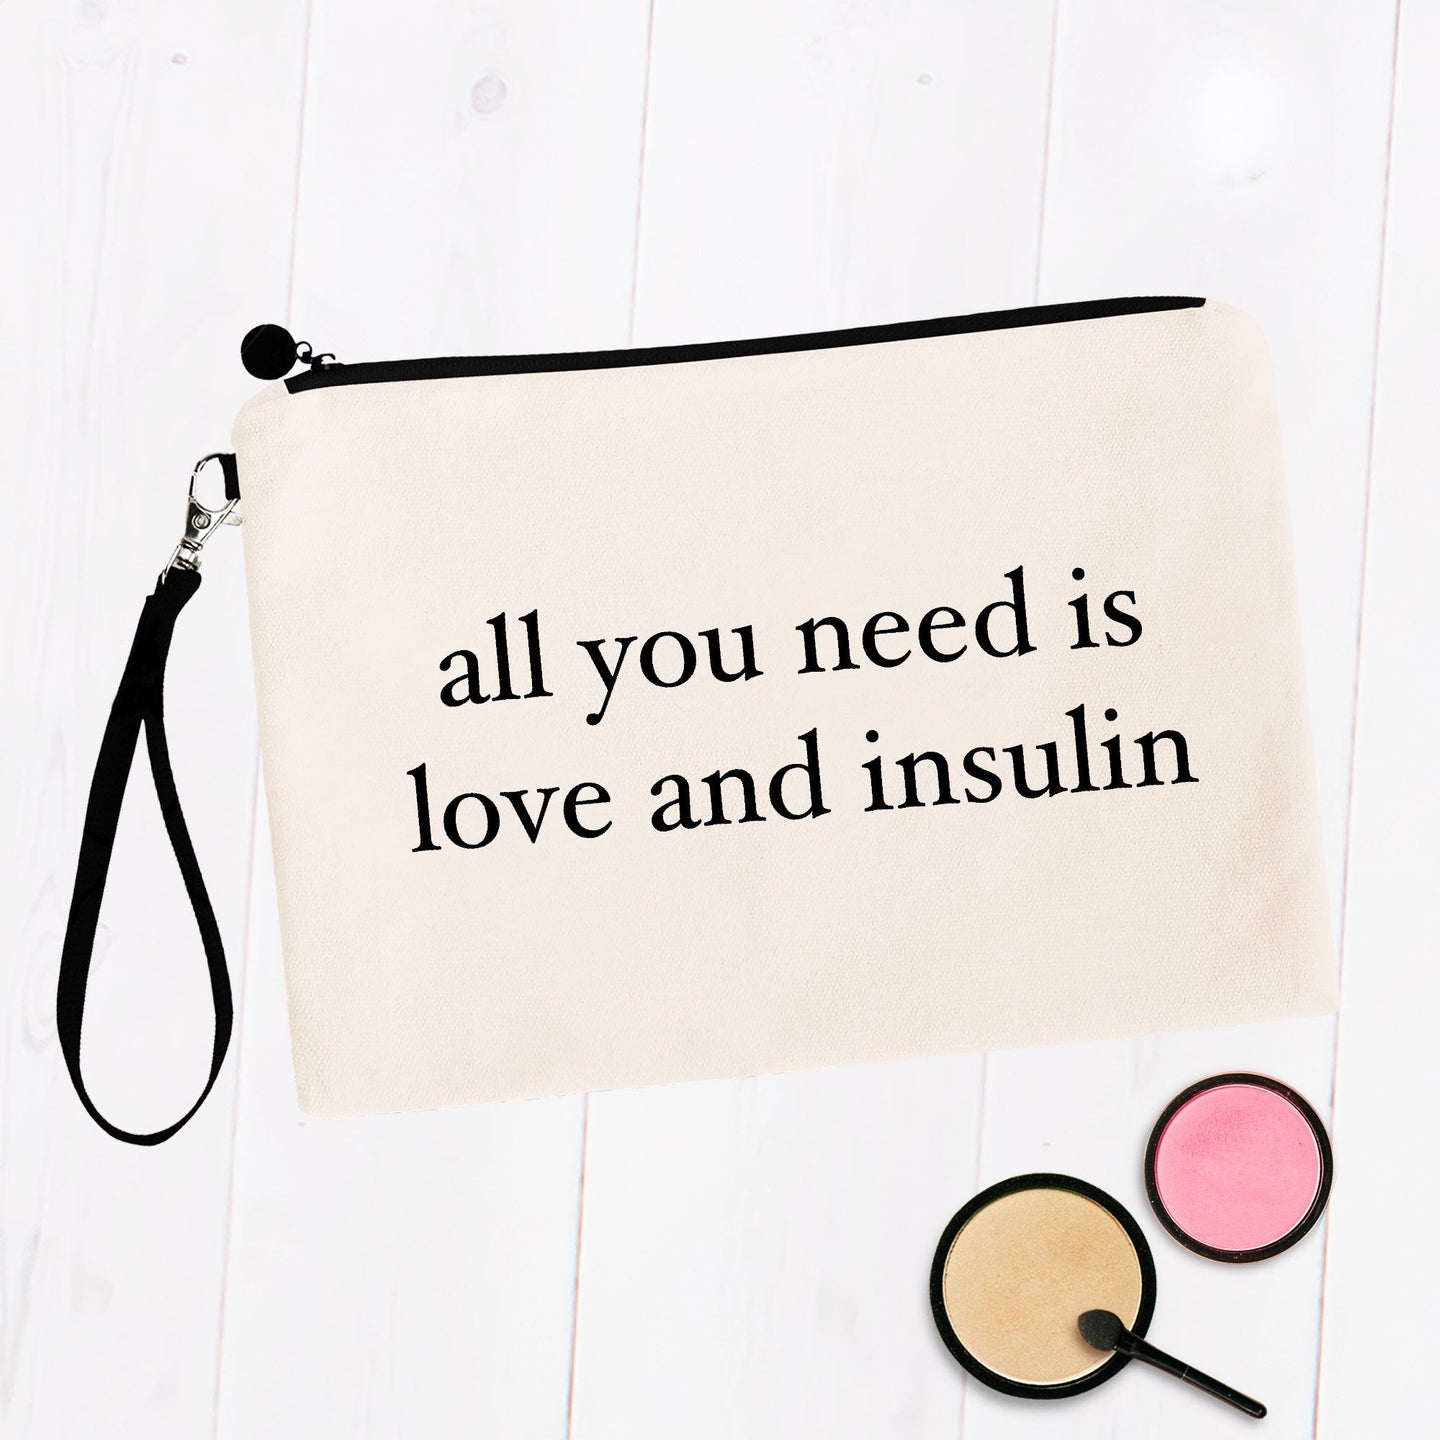 All You Need is Love and Insulin